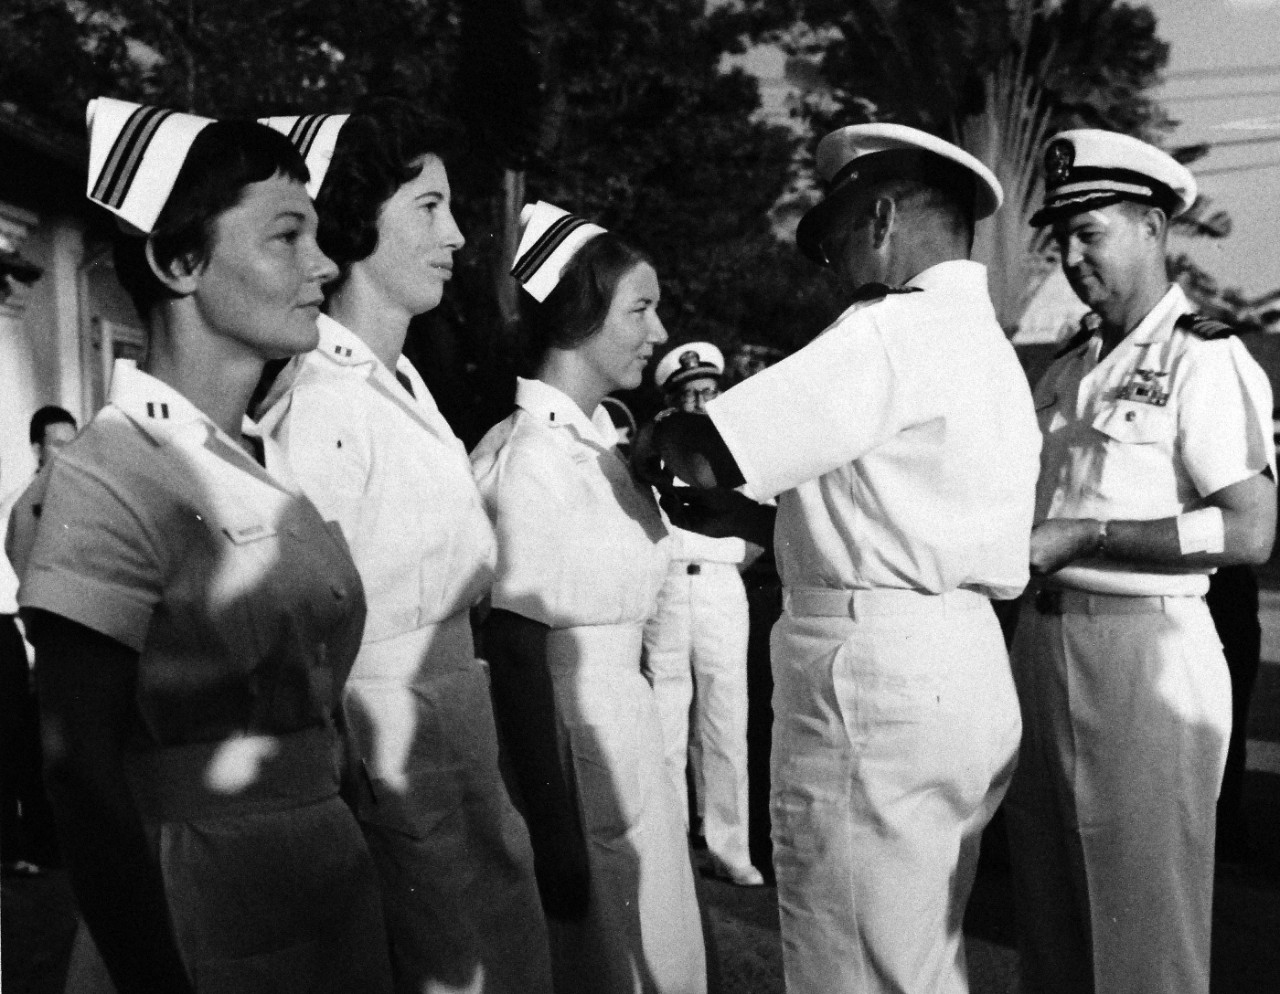 KN-10517:   Purple Hearts awarded to U.S. Navy Nurses, January 1965.   Three of the four U.S. Navy Nurses awarded the Purple Heart in Vietnam, receive their awards from Captain Archie Kuntze, Commanding Officer, U.S. Naval Support Activity, Saigon.  The nurses (left to right): Lieutenant Barbara J. Wooster; Lieutenant Ruth A. Mason; and Lieutenant Junior Grade D. Reynolds, are the first women to receive the medal in Vietnam.  Another nurse Lieutenant Francis L. Crumpton, was flown to Clark Air Base, Philippines, earlier for treatment.  The nurses, although injured in the Communist bombing of the HQ on Christmas Eve, refused medical treatment for themselves while rendering First Aid to others wounded by the explosion.  Commander Miles D. Turley, Executive Officer of the Naval Support Activity (right), assists his Commanding Officer in the presentation.  Turley was wounded New Year’s Day while investigating reports of sniper fire on water skiers in the Saigon River.  Photograph released January 15, 1965.  Official Department of Defense photograph, now in the collections of the National Archives.   (Black and White Only).  